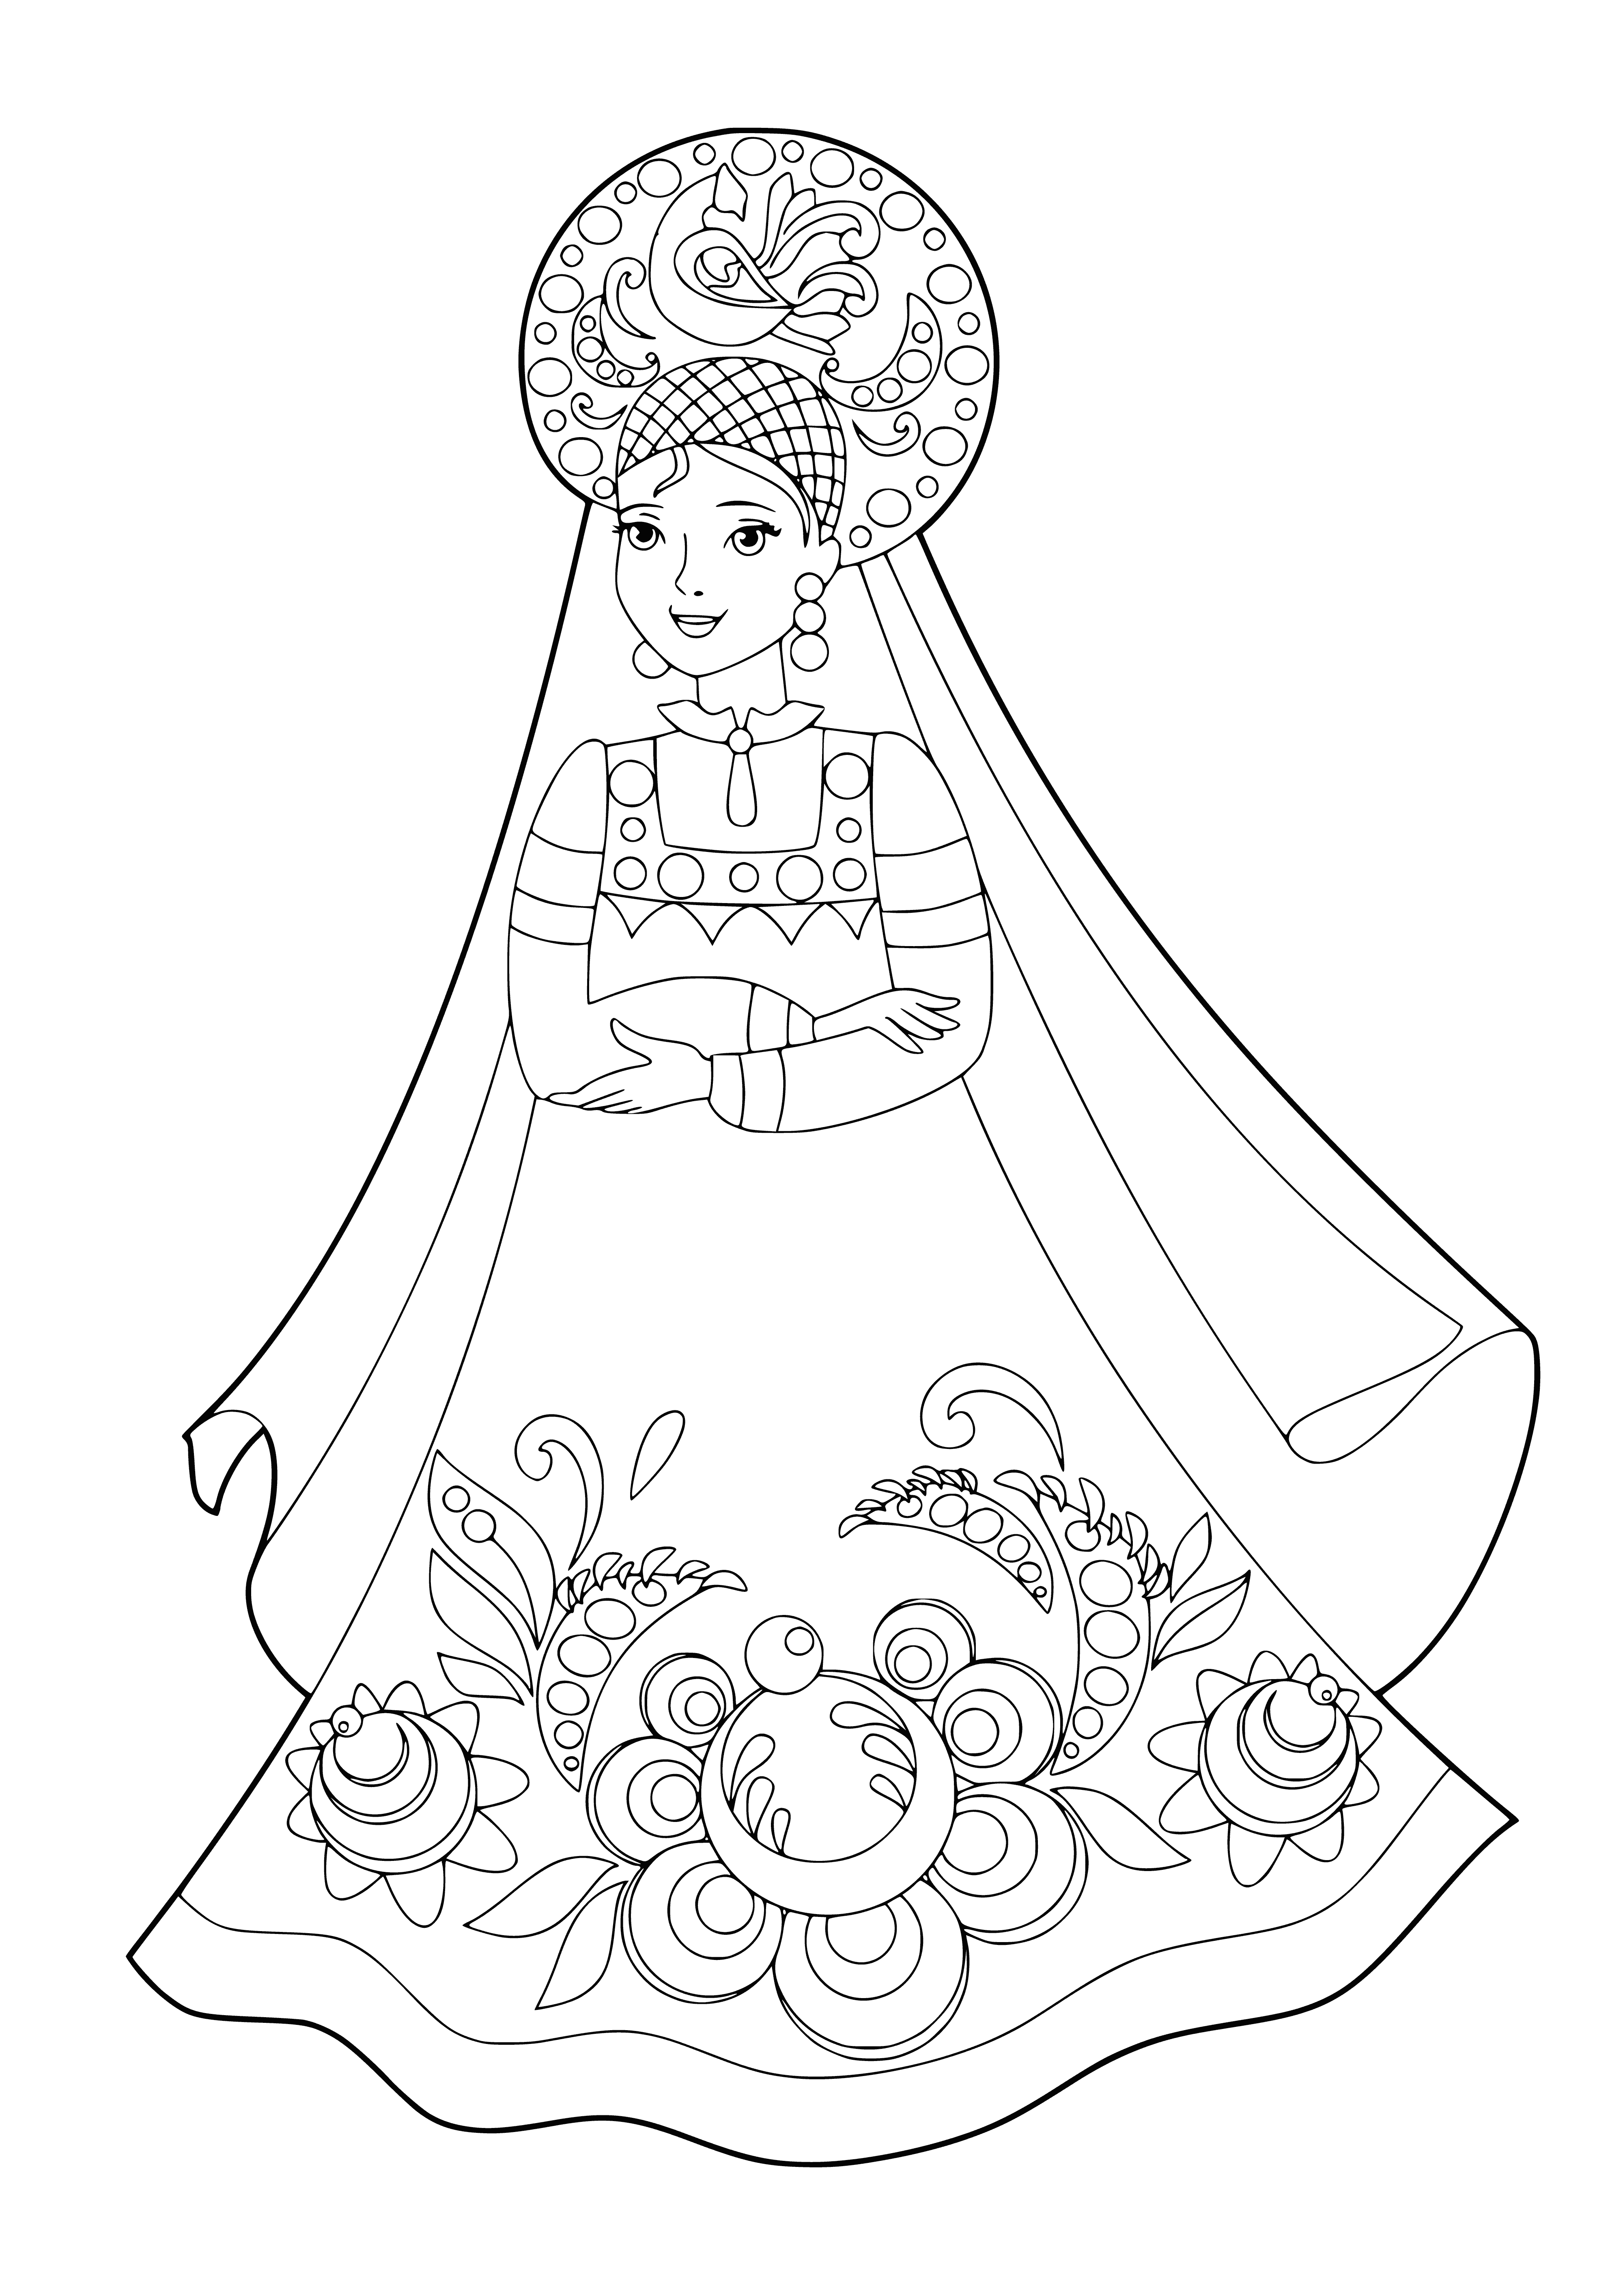 coloring page: 3 elegant Russian ladies in white dresses w/colored flowers in hair look seriously at camera.